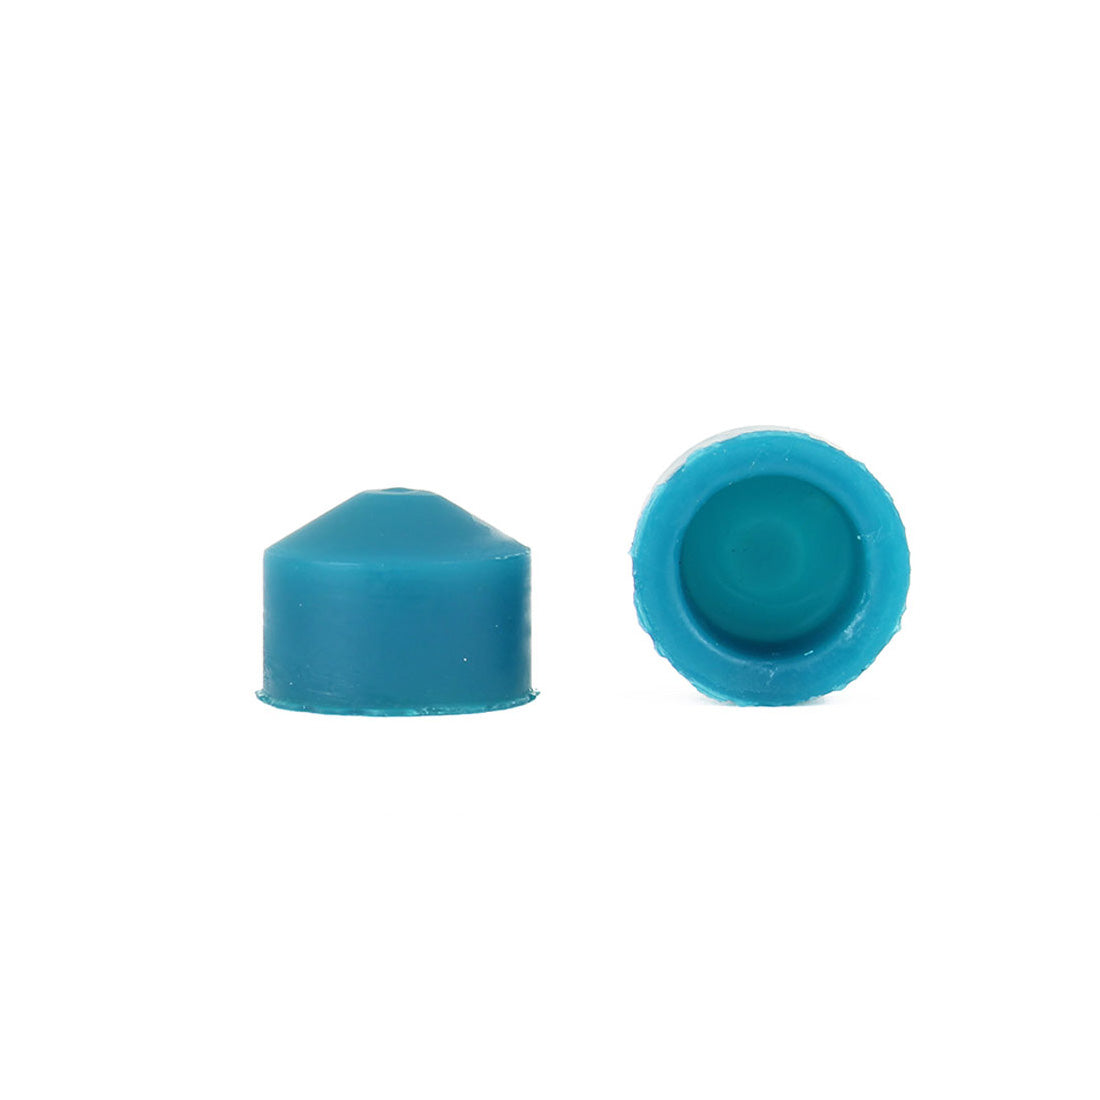 Modus Pivot Cup Single - Blue Skateboard Hardware and Parts